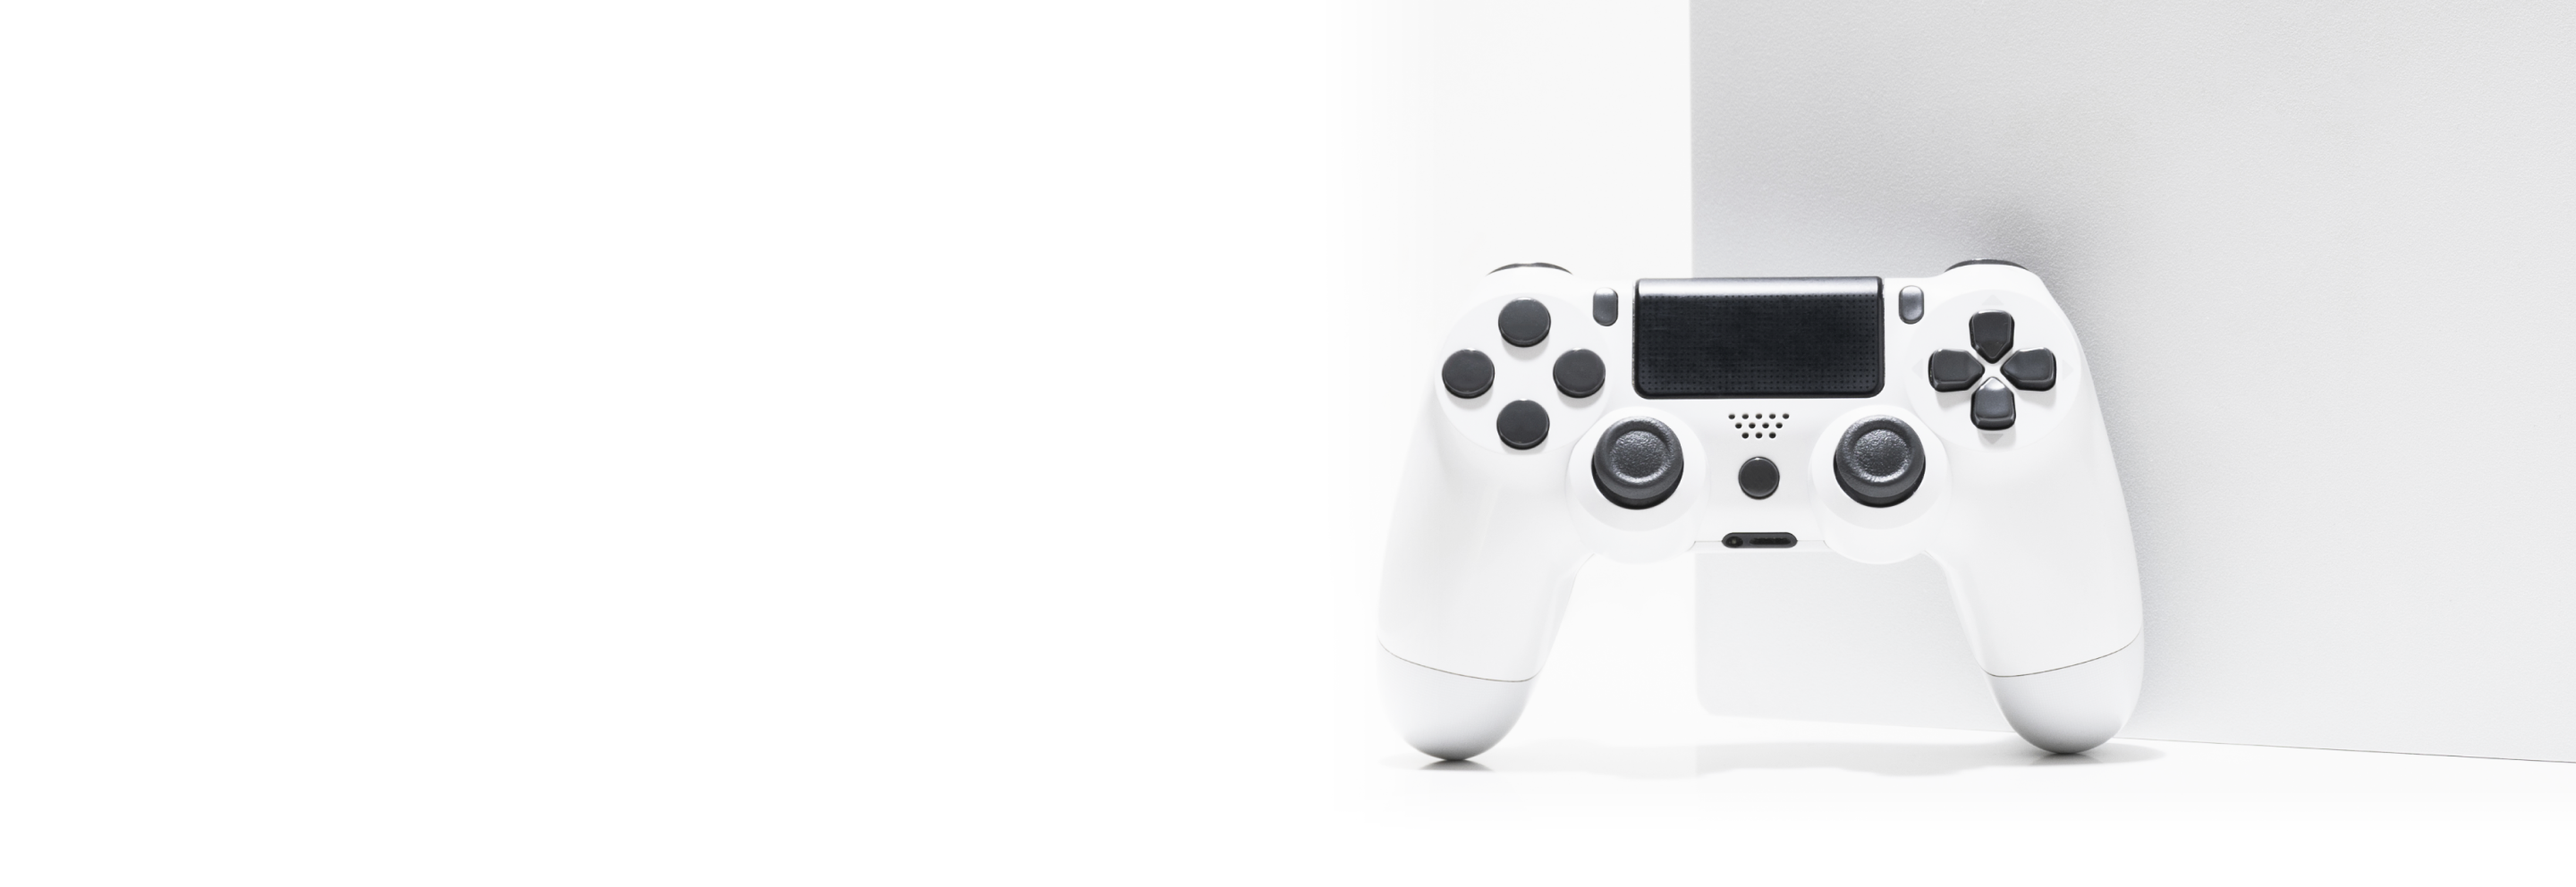 Gaming system on white background